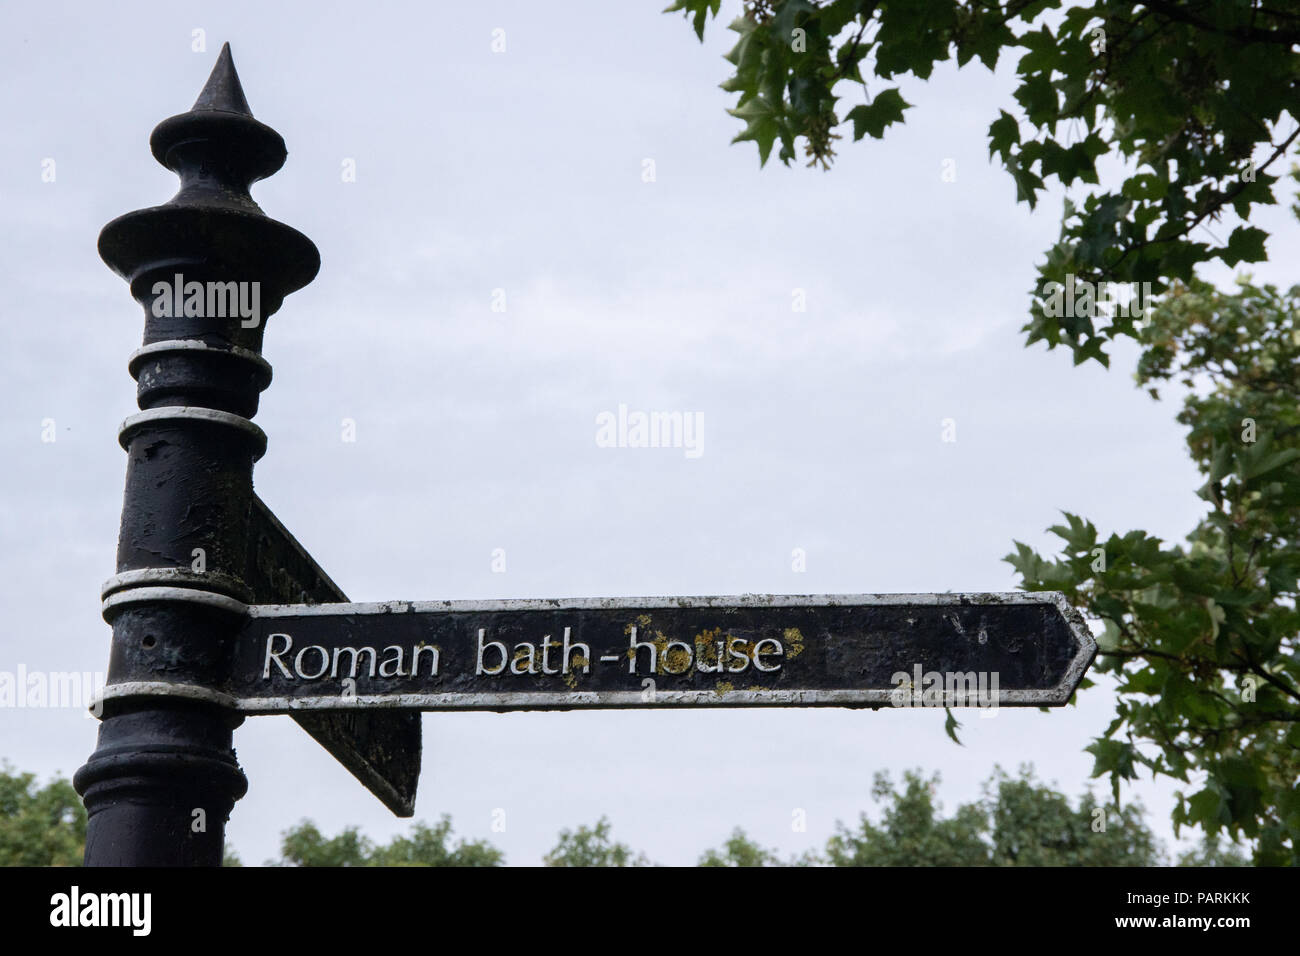 Street signs and information boards in the Lancashire city town of Lancaster, UK Stock Photo